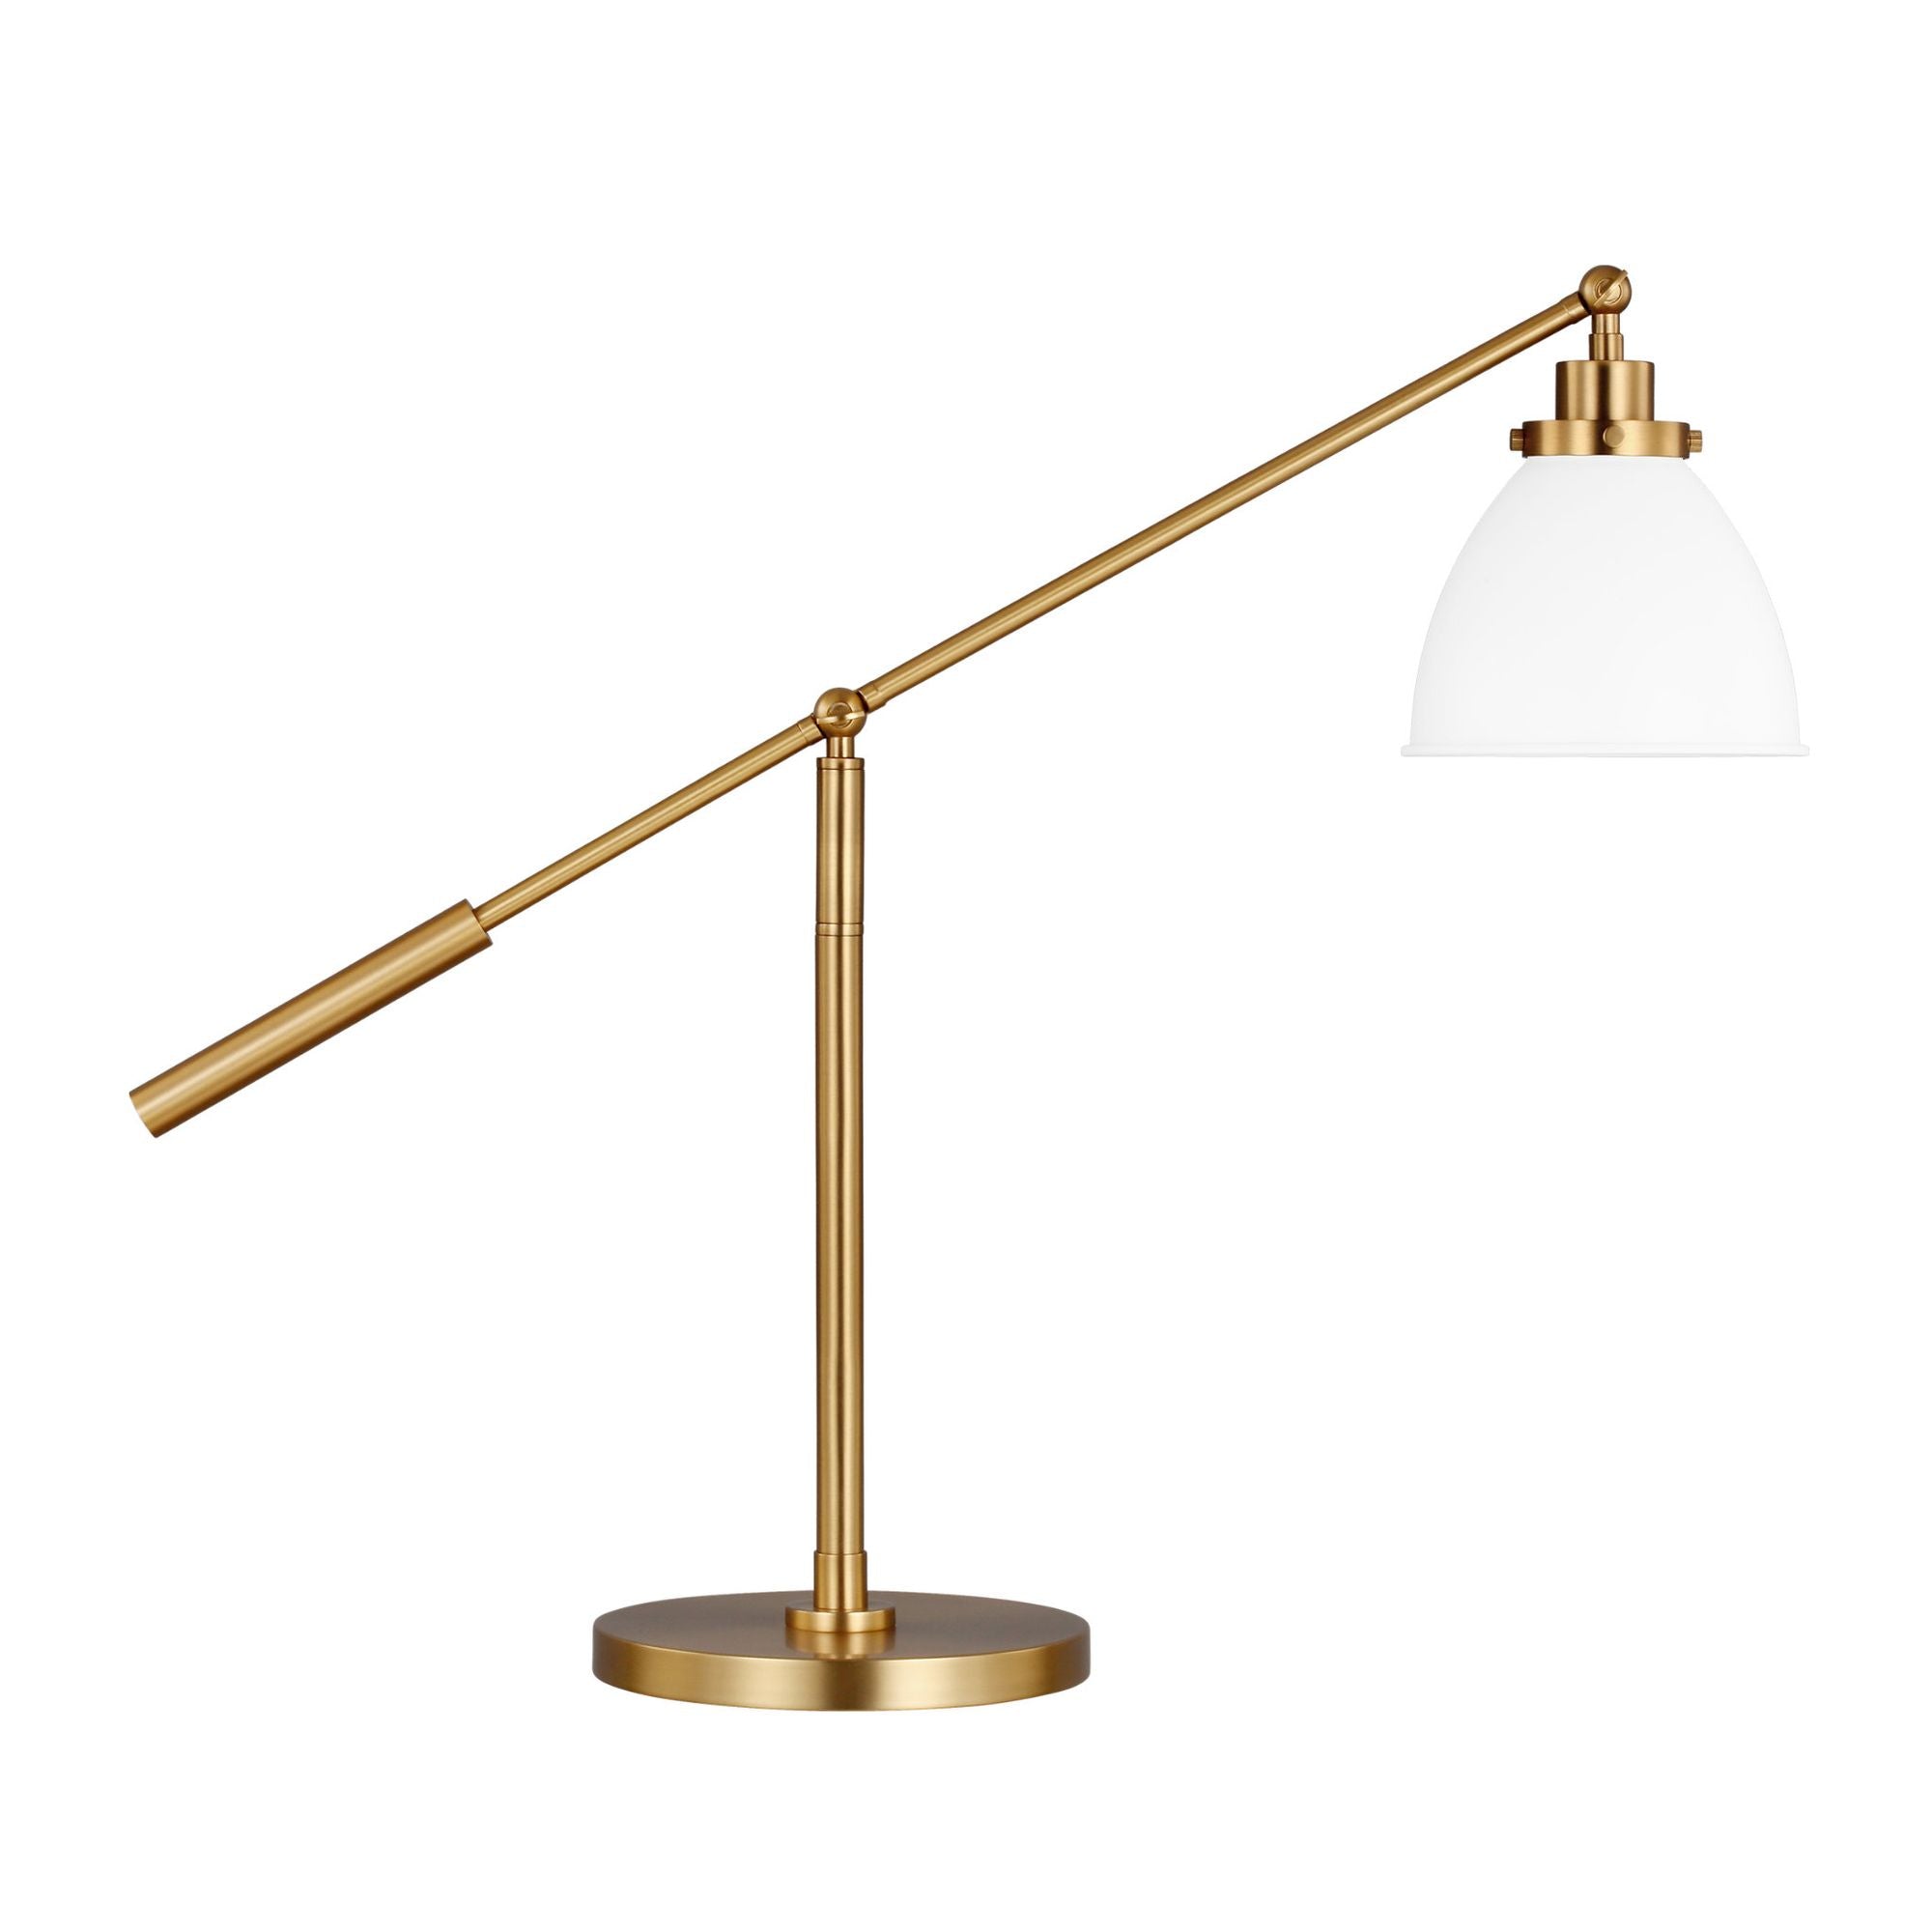 Chapman & Myers Wellfleet Dome Desk Lamp in Matte White and Burnished Brass